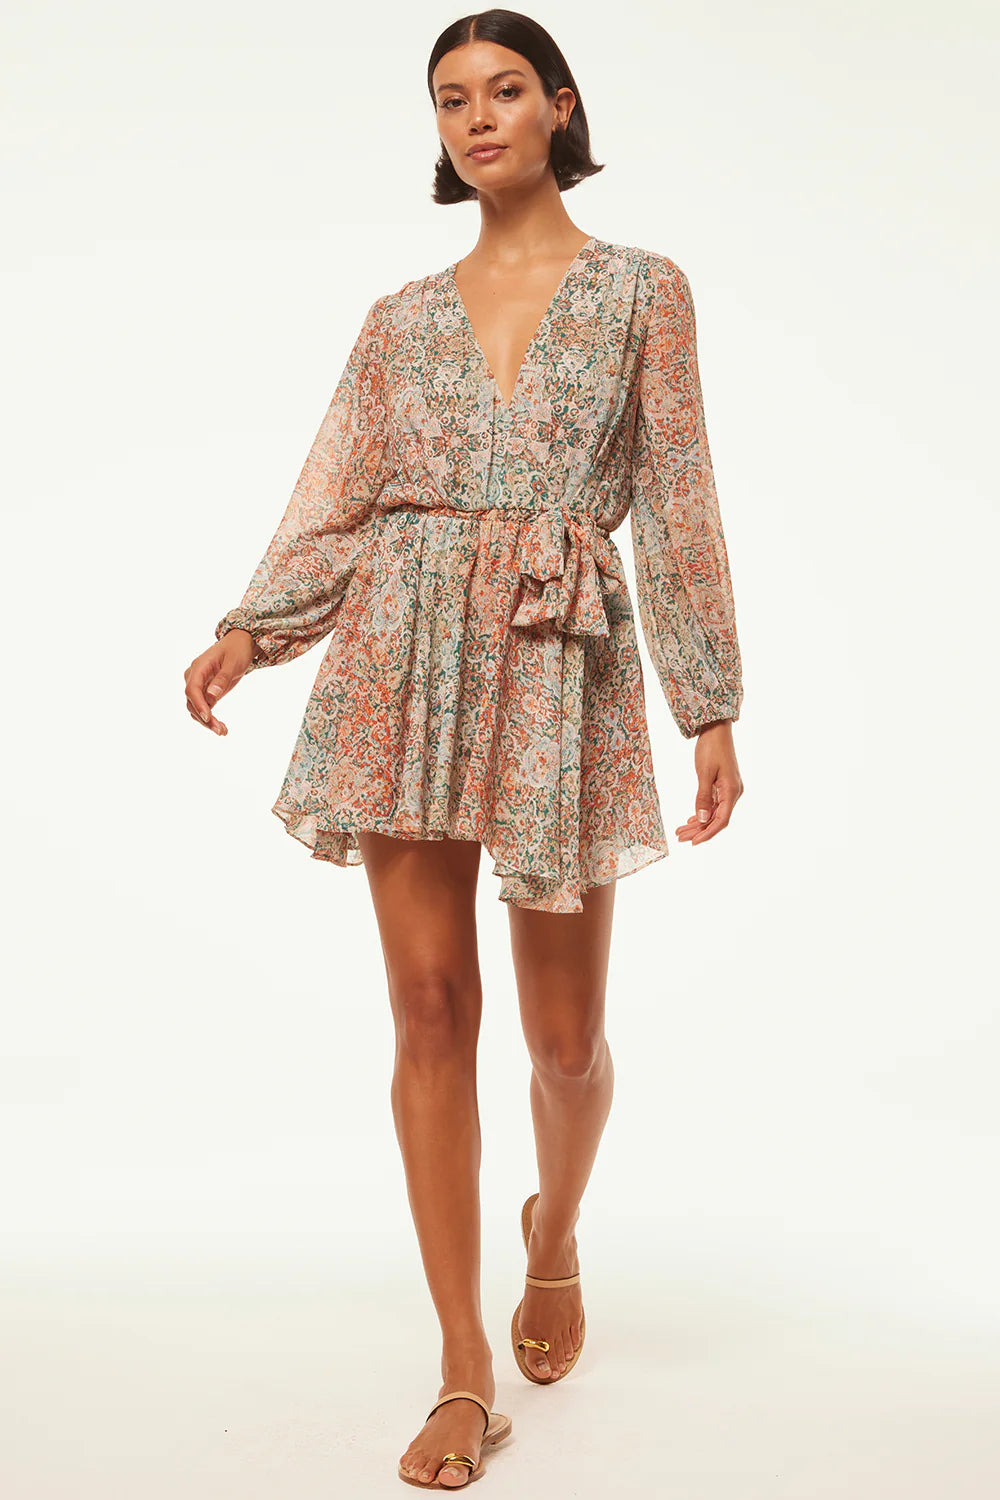 CARIA DRESS IN OMBRE TAPESTRY - Romi Boutique